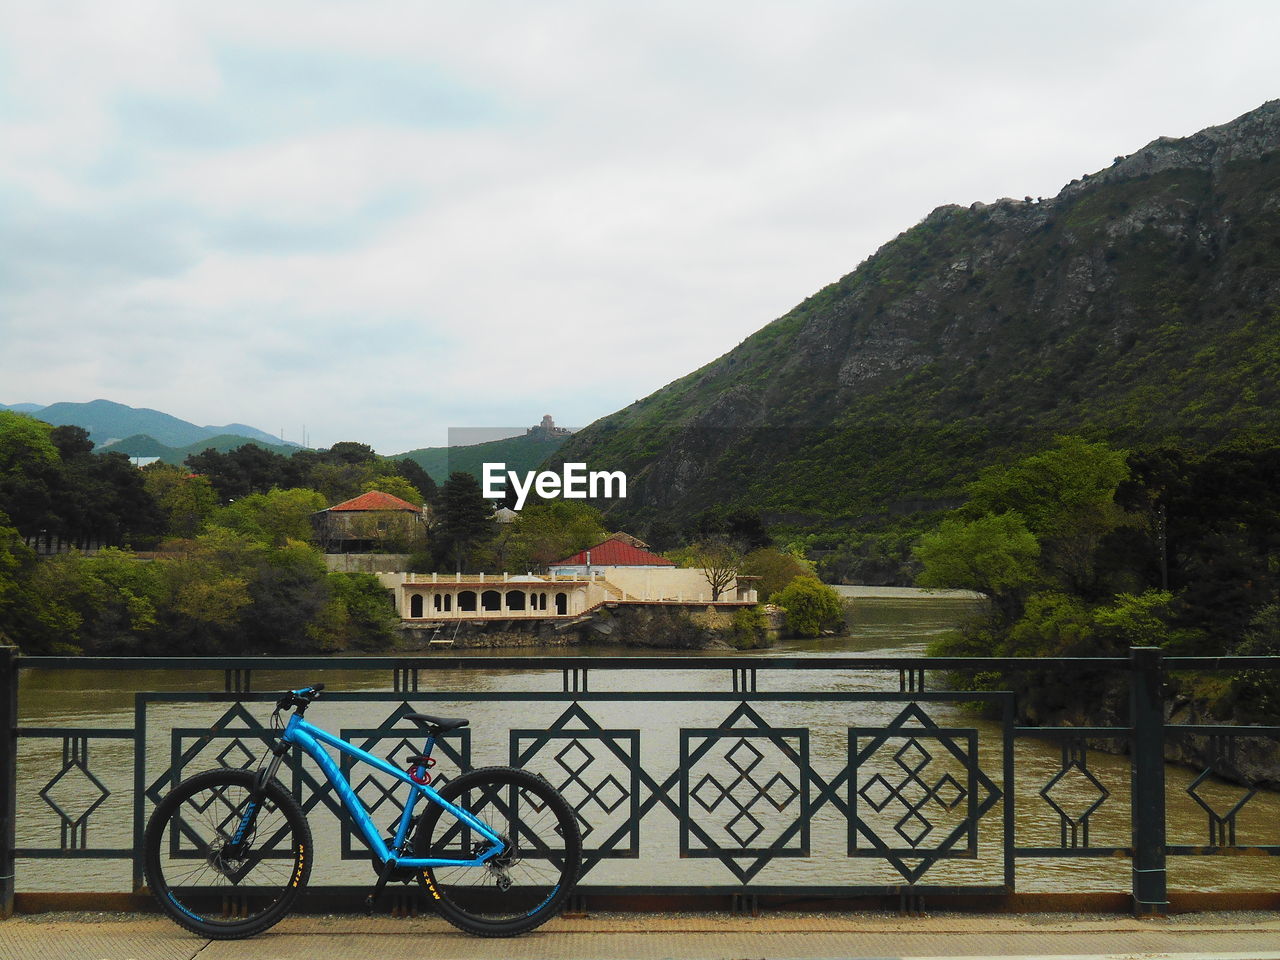 BICYCLE BY RAILING AGAINST MOUNTAINS